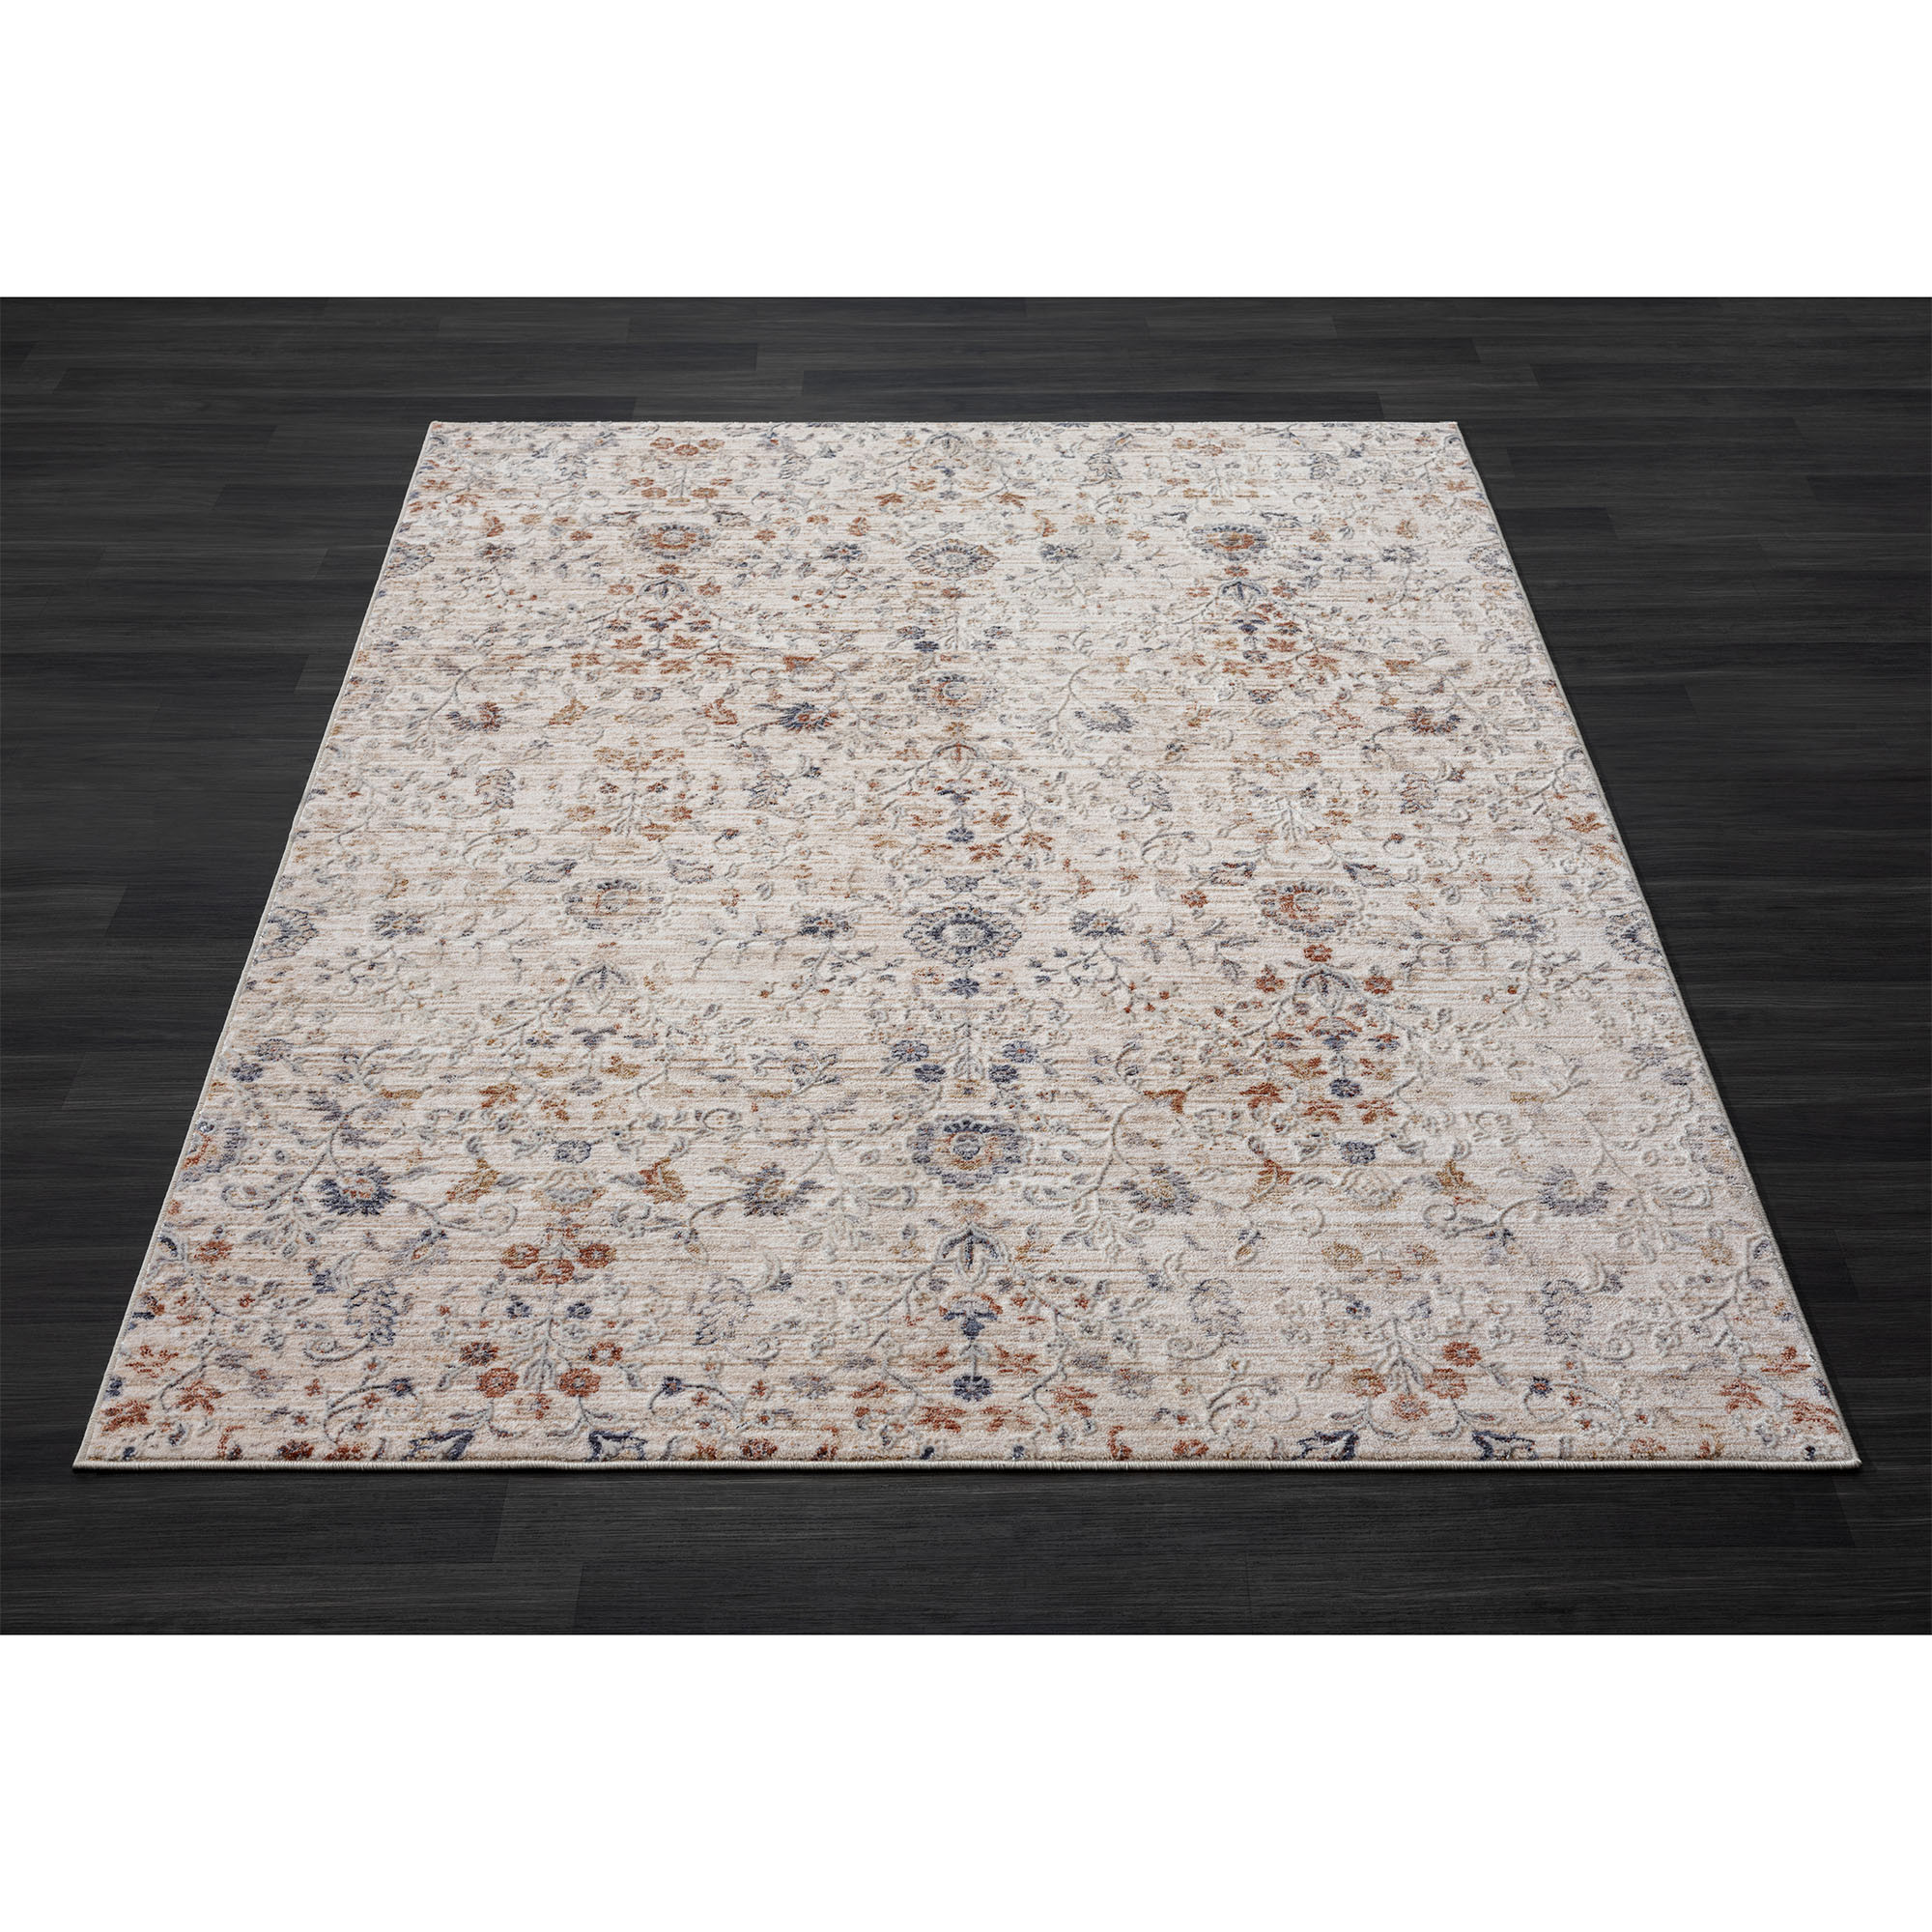 4' X 6' Ivory Floral Area Rug-515876-1